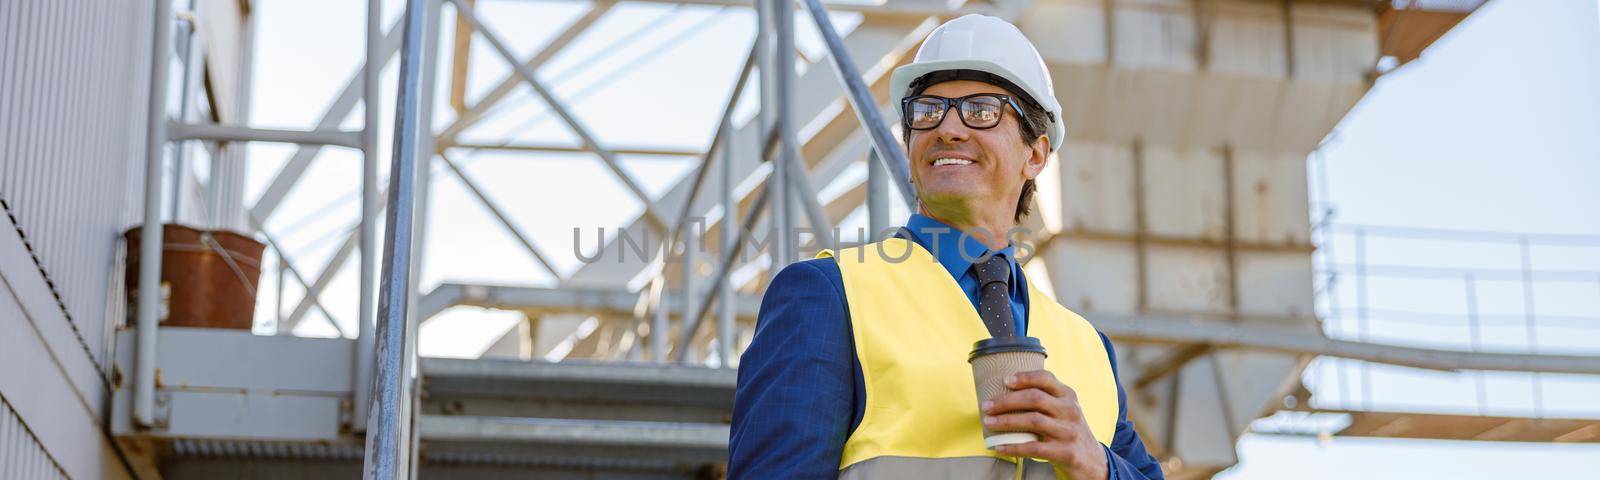 Cheerful man in work vest holding takeaway drink and folder while standing on staircase at manufacturing plant